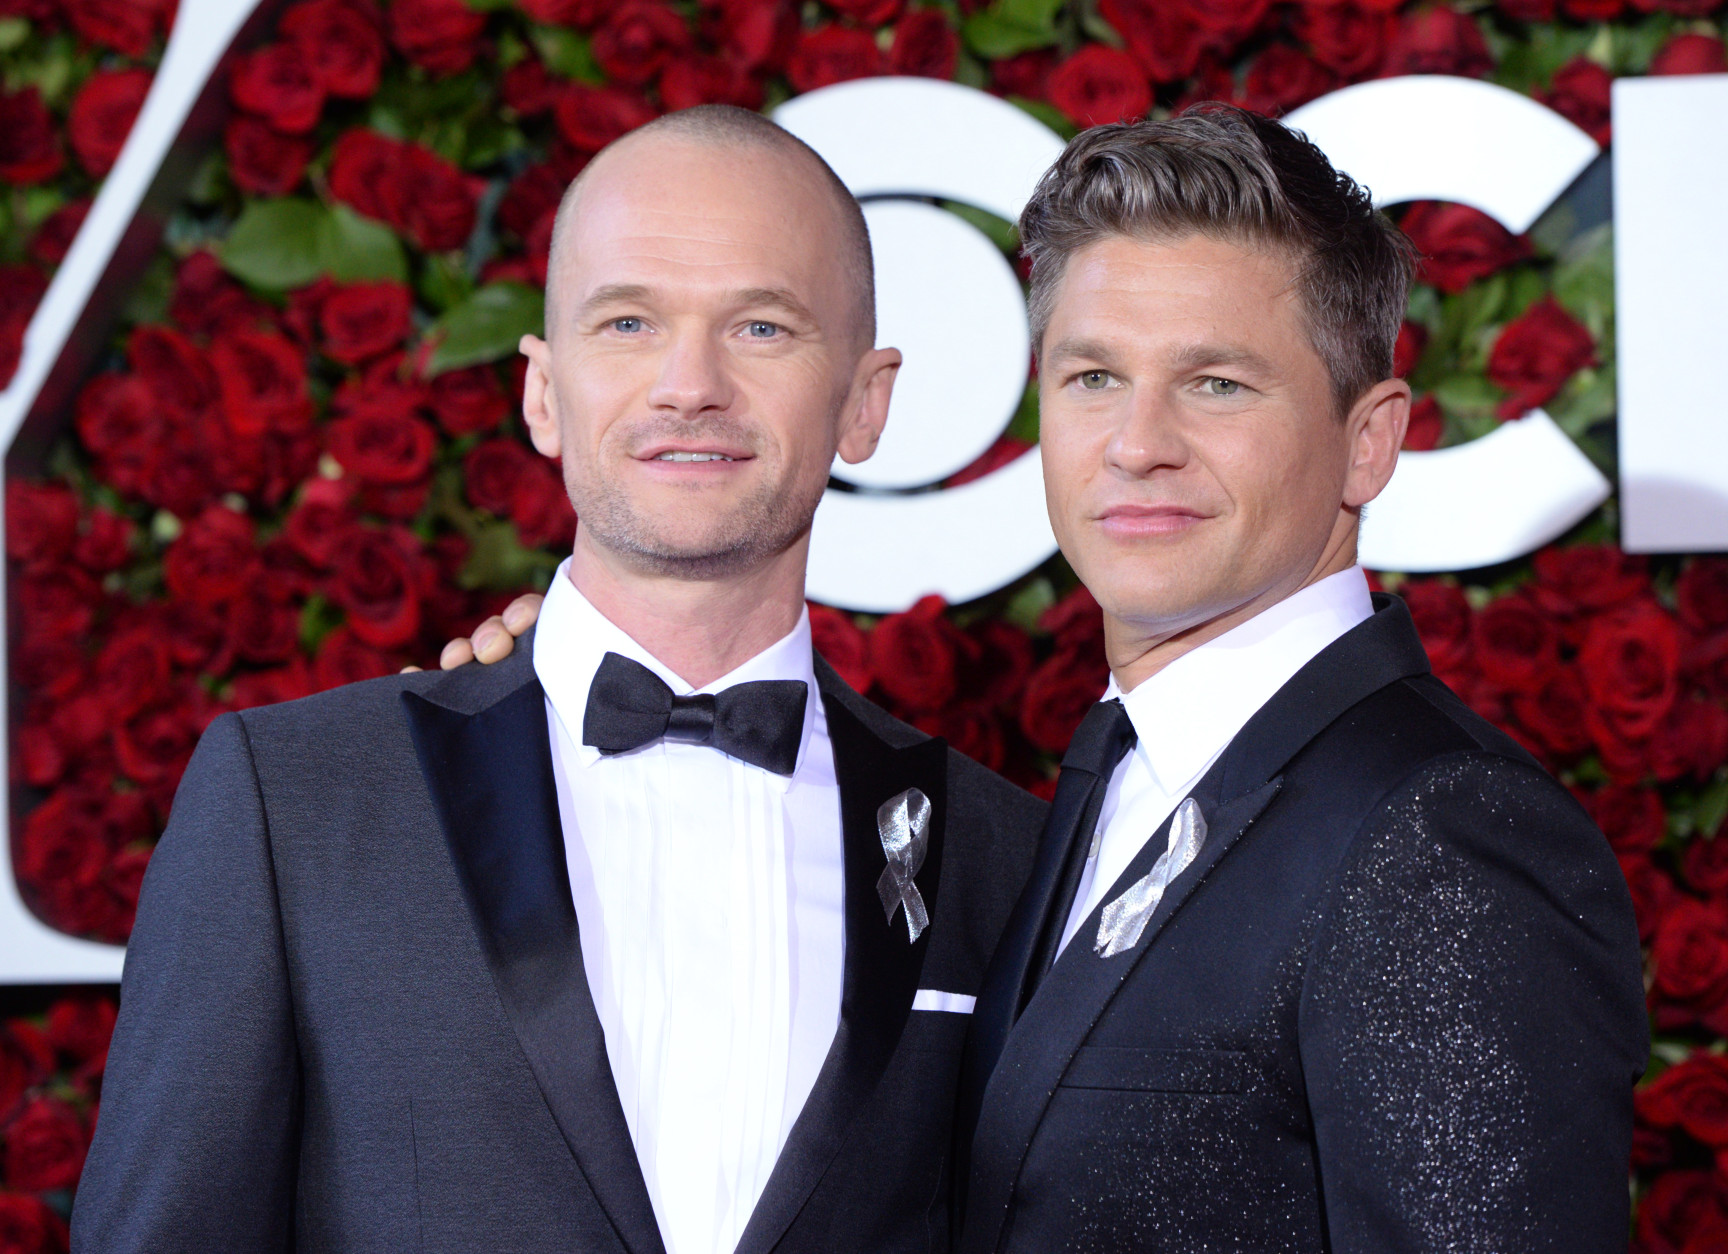 Neil Patrick Harris, left, and David Burtka wear silver ribbons as they arrive at the Tony Awards at the Beacon Theatre on Sunday, June 12, 2016, in New York. (Photo by Charles Sykes/Invision/AP)